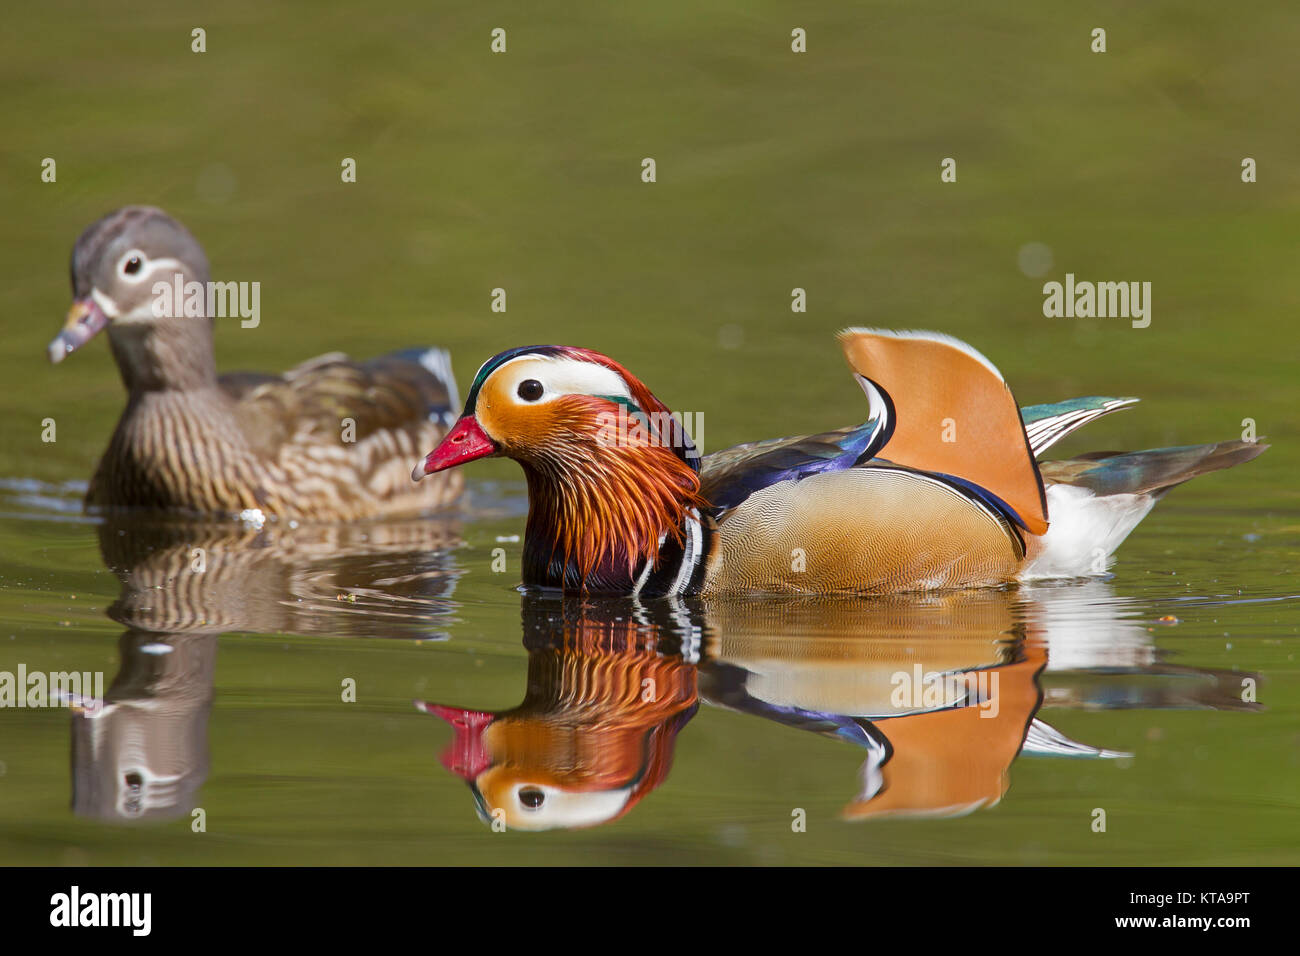 Mandarin duck (Aix galericulata) pair, male and female swimming in pond, native to East Asia Stock Photo